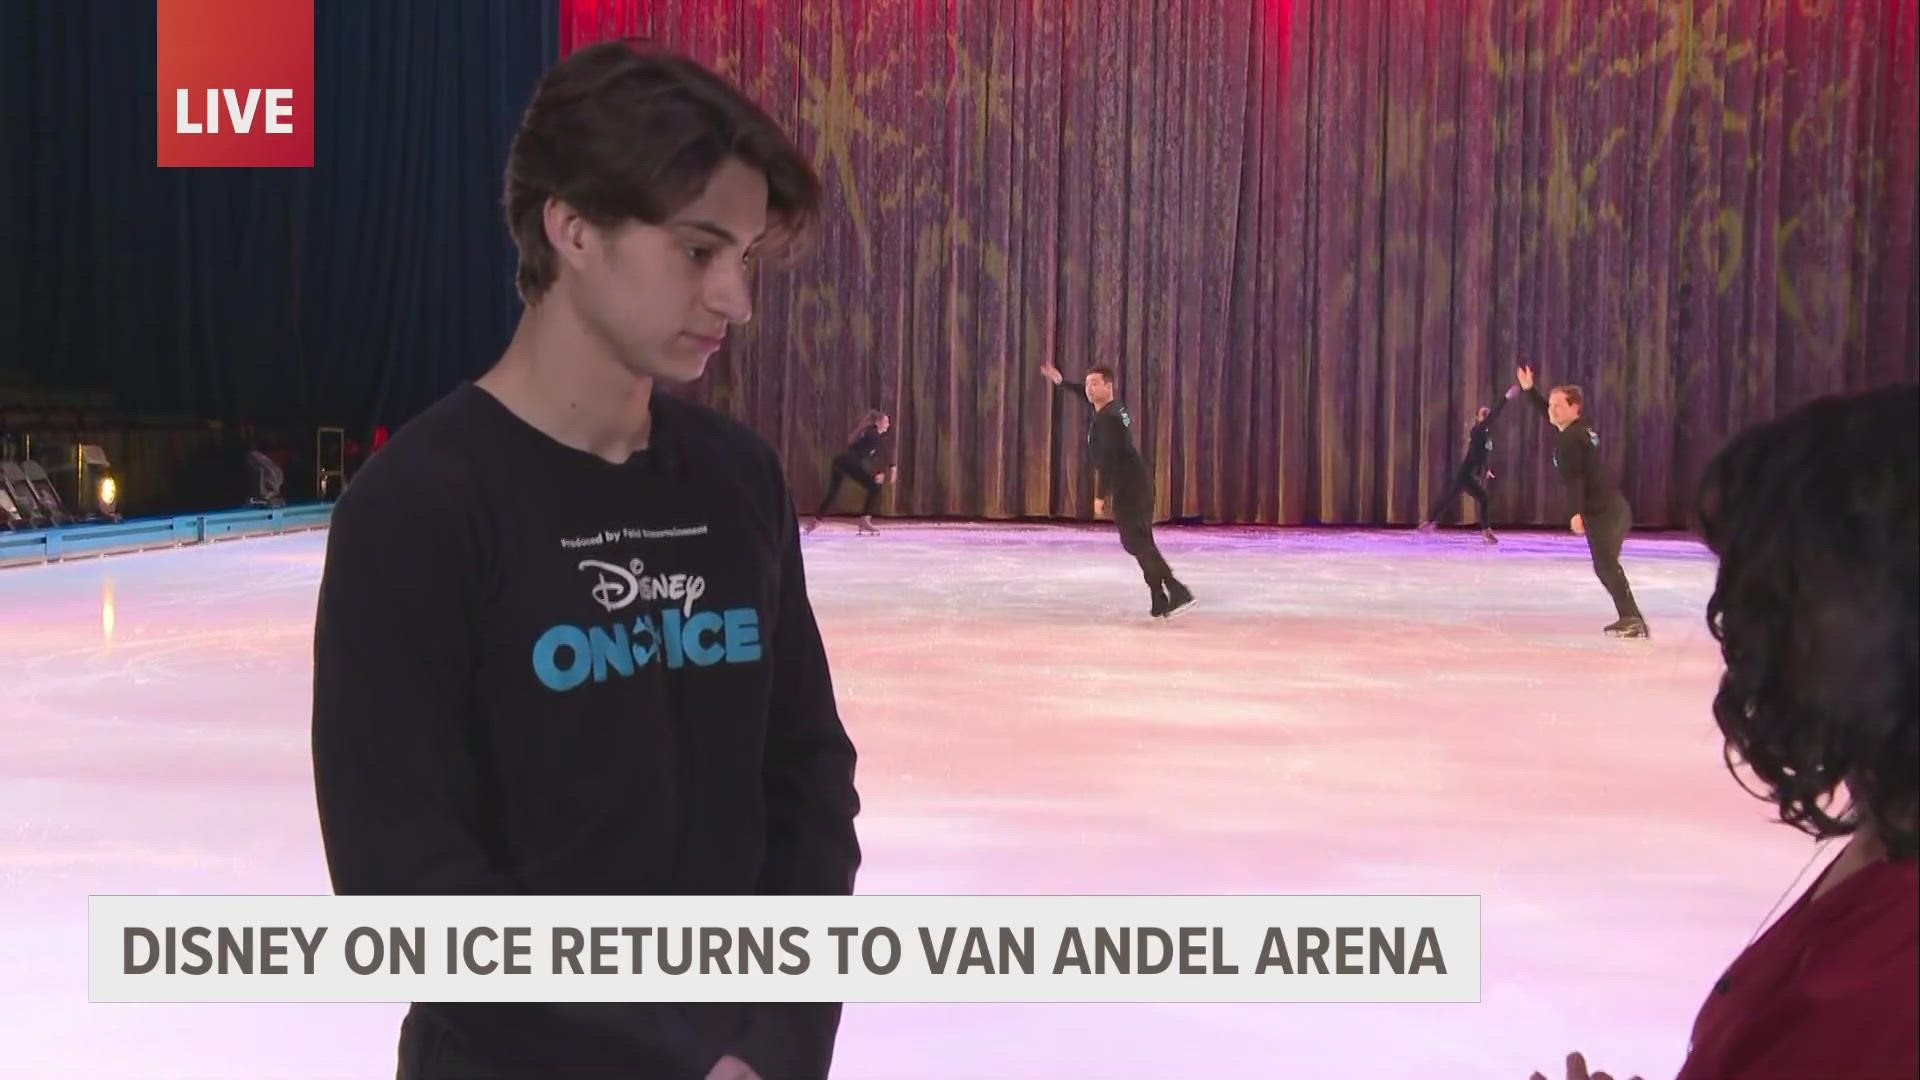 The skaters have been rehearsing for their performances of Disney On Ice this weekend.